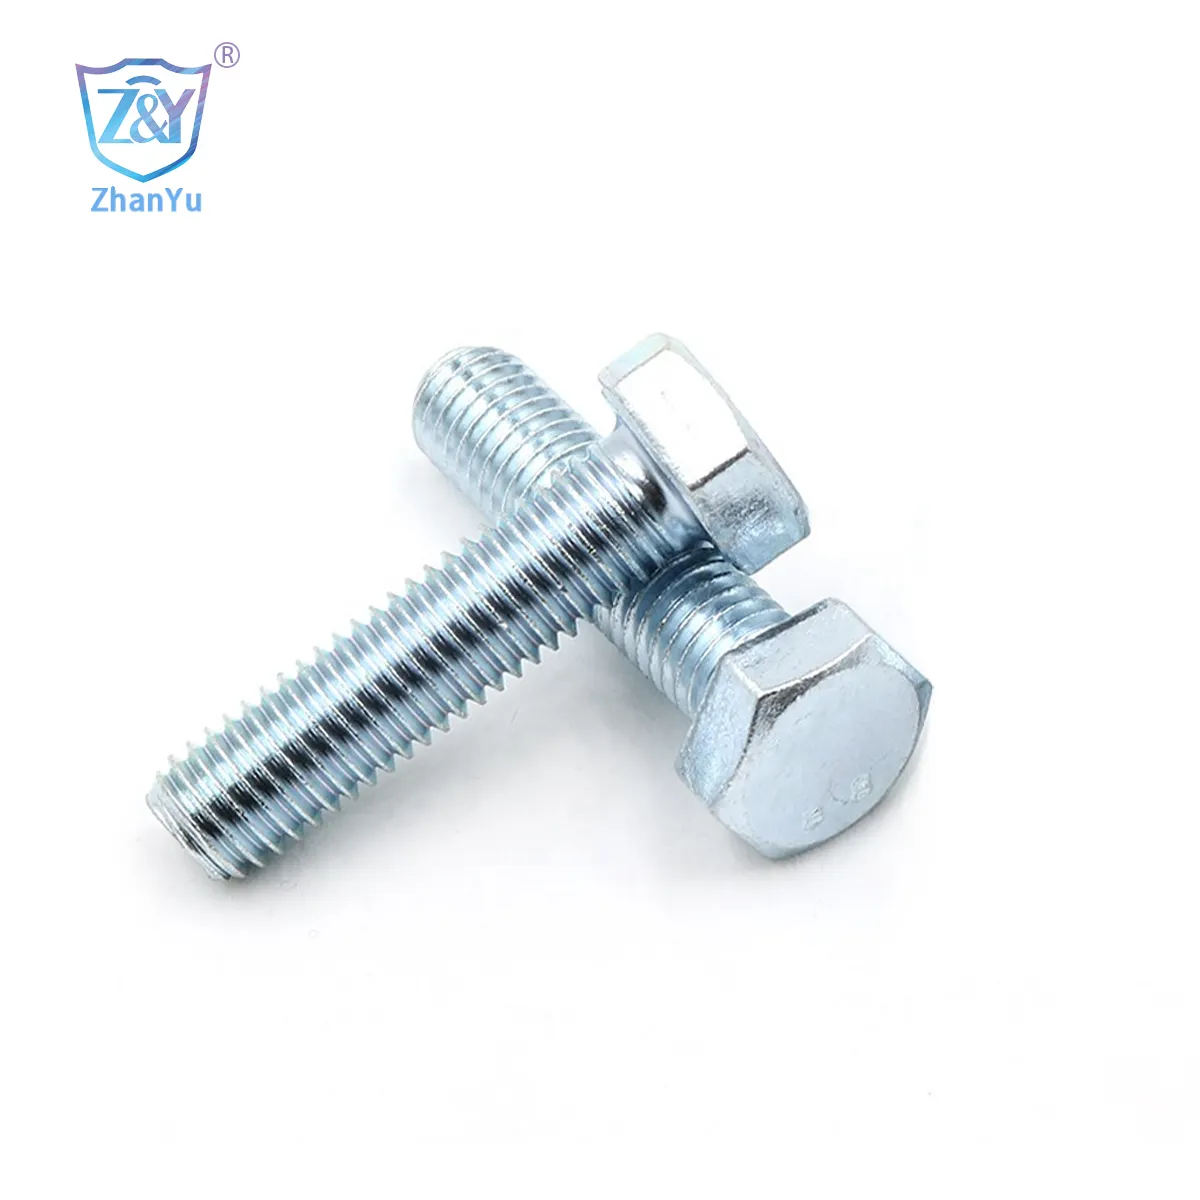 Factory Price DIN933 Hex Bolt With Nut Zinc/Black Pernos Y Tuercas 4.8/8.8 Grade Carbon Steel Hex Bolt With Full Thread